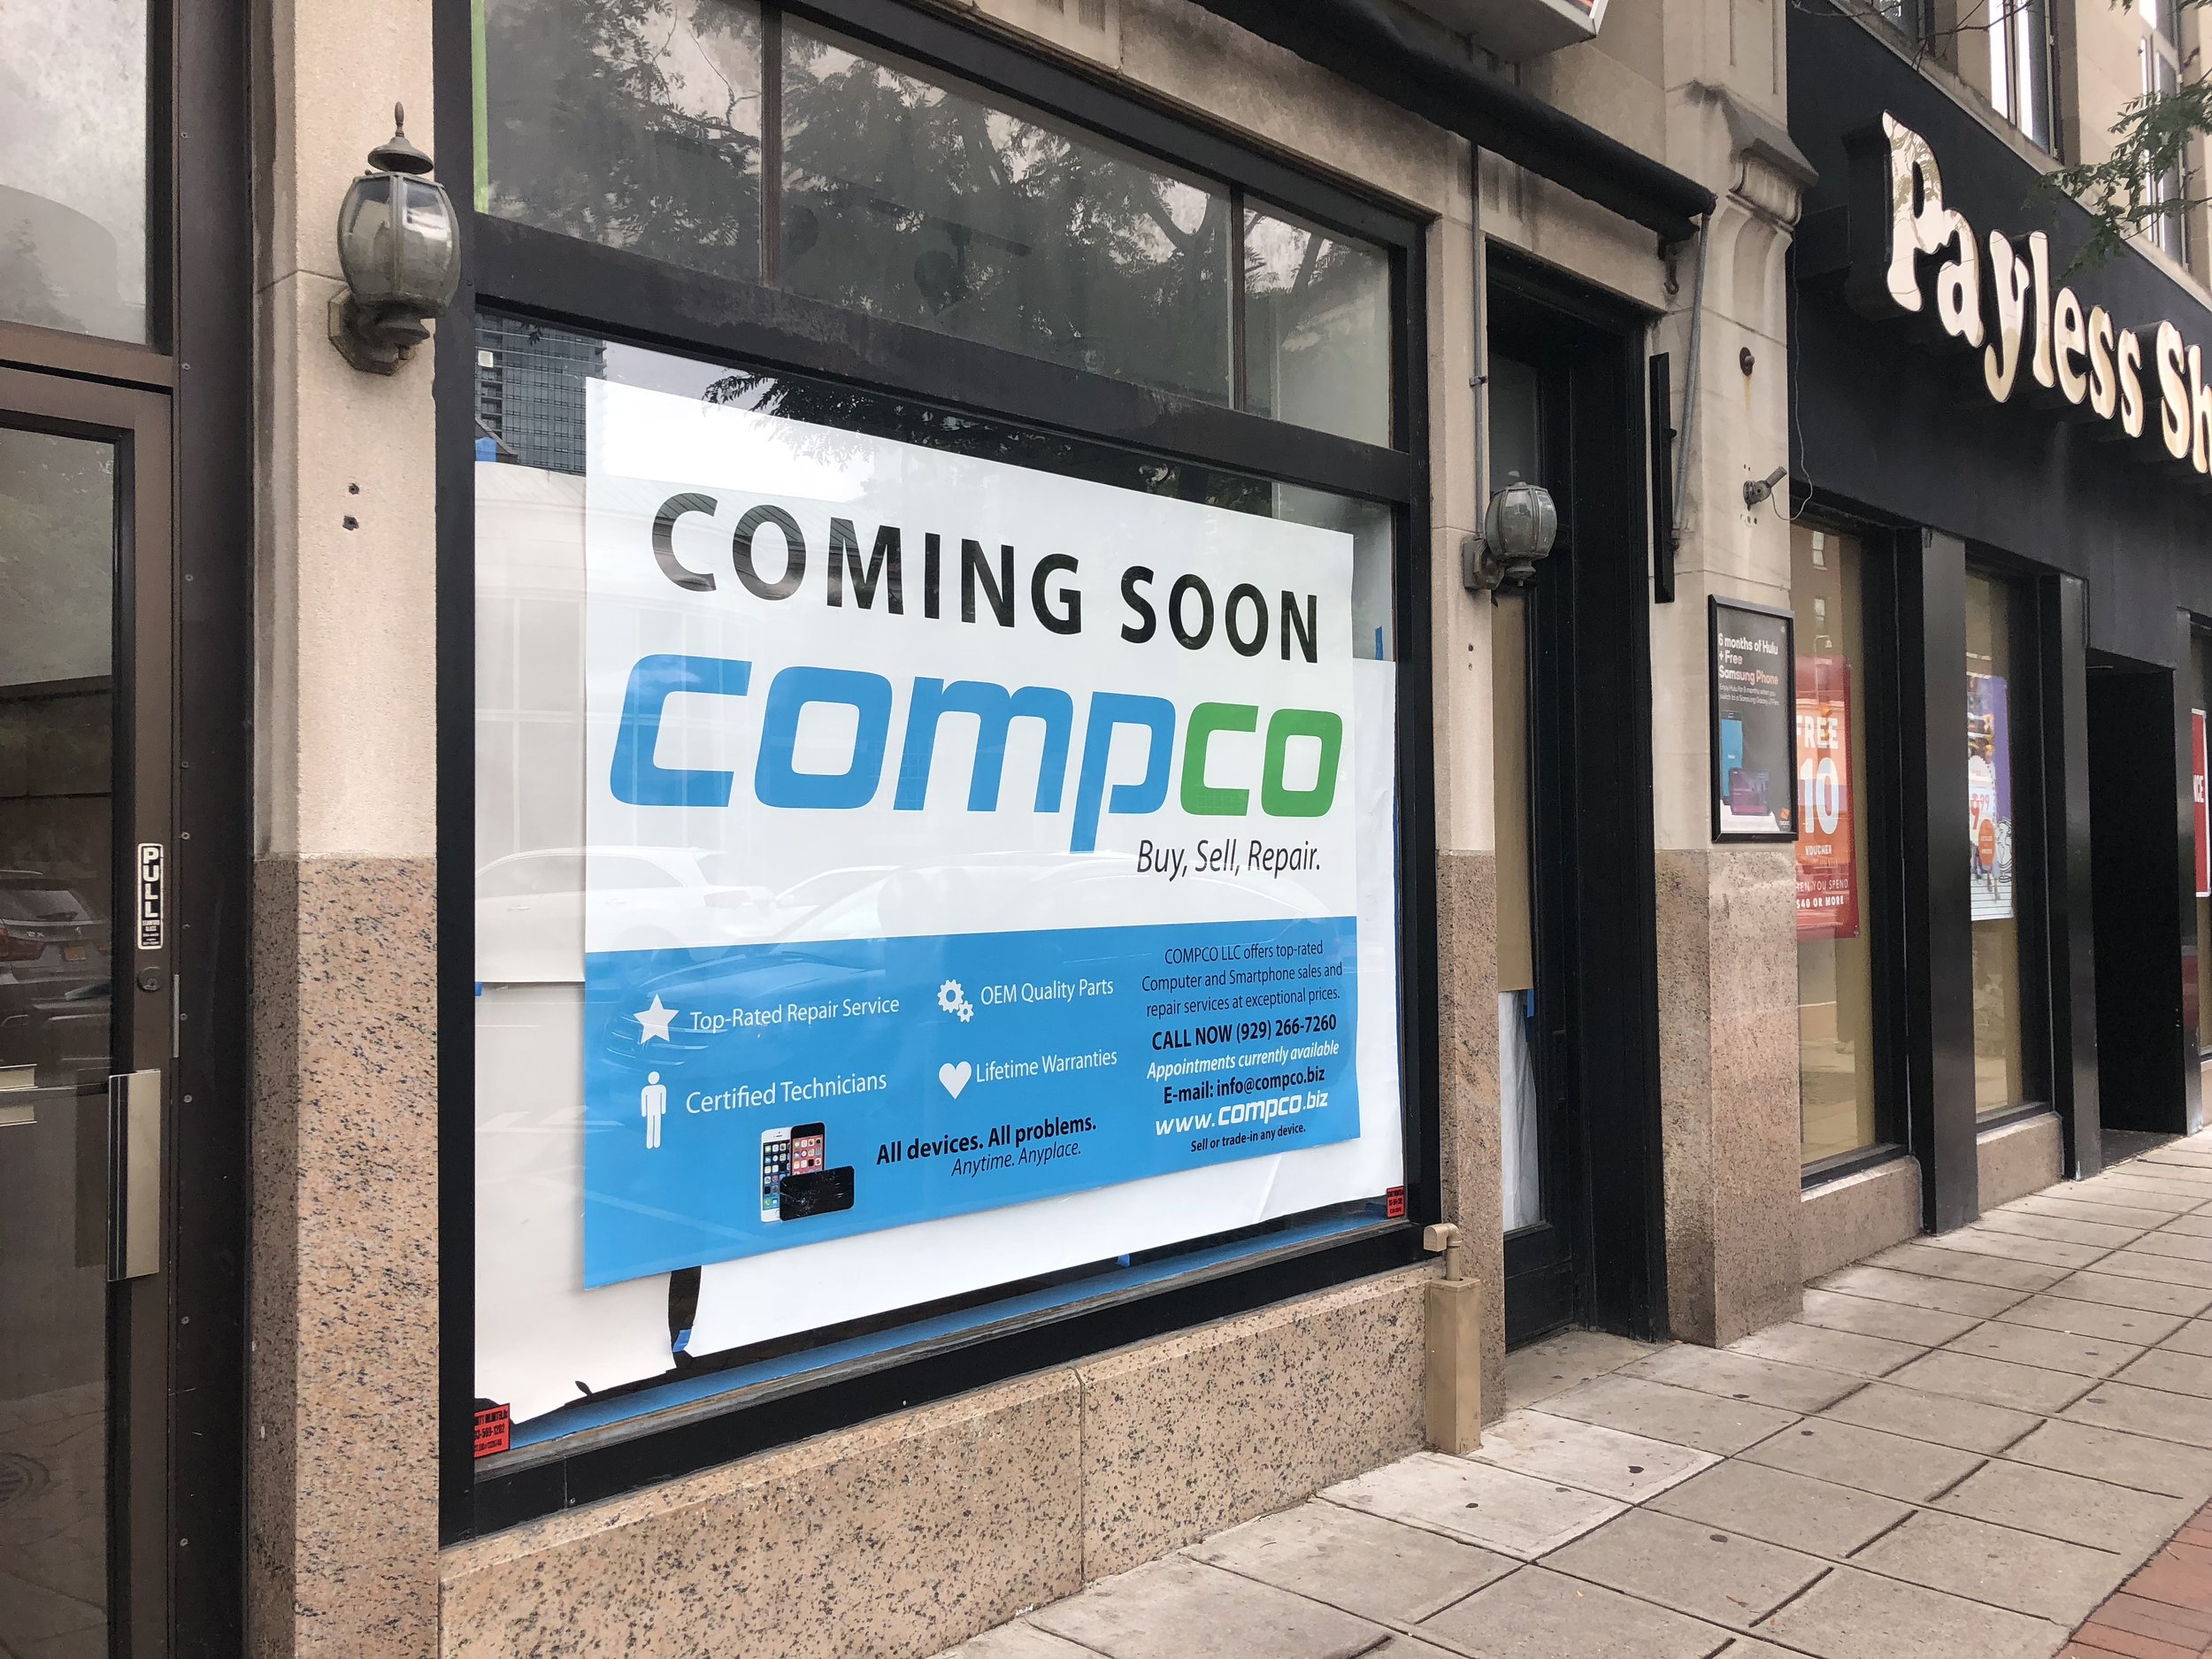  New Compco coming soon sign - August 2018 